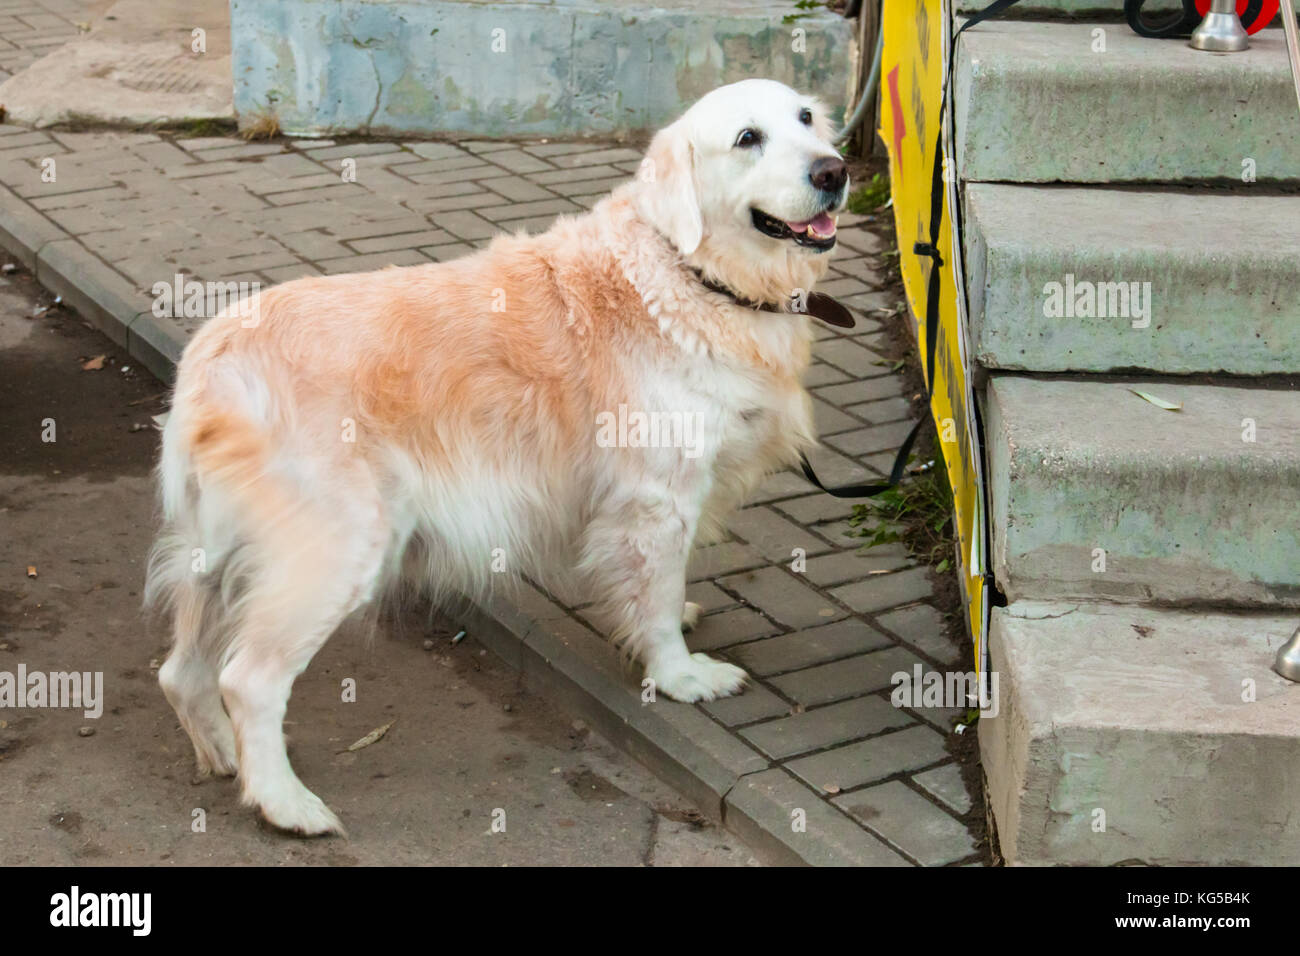 Purebred dog beige white golden retriever with long hair knitted near the  store Stock Photo - Alamy